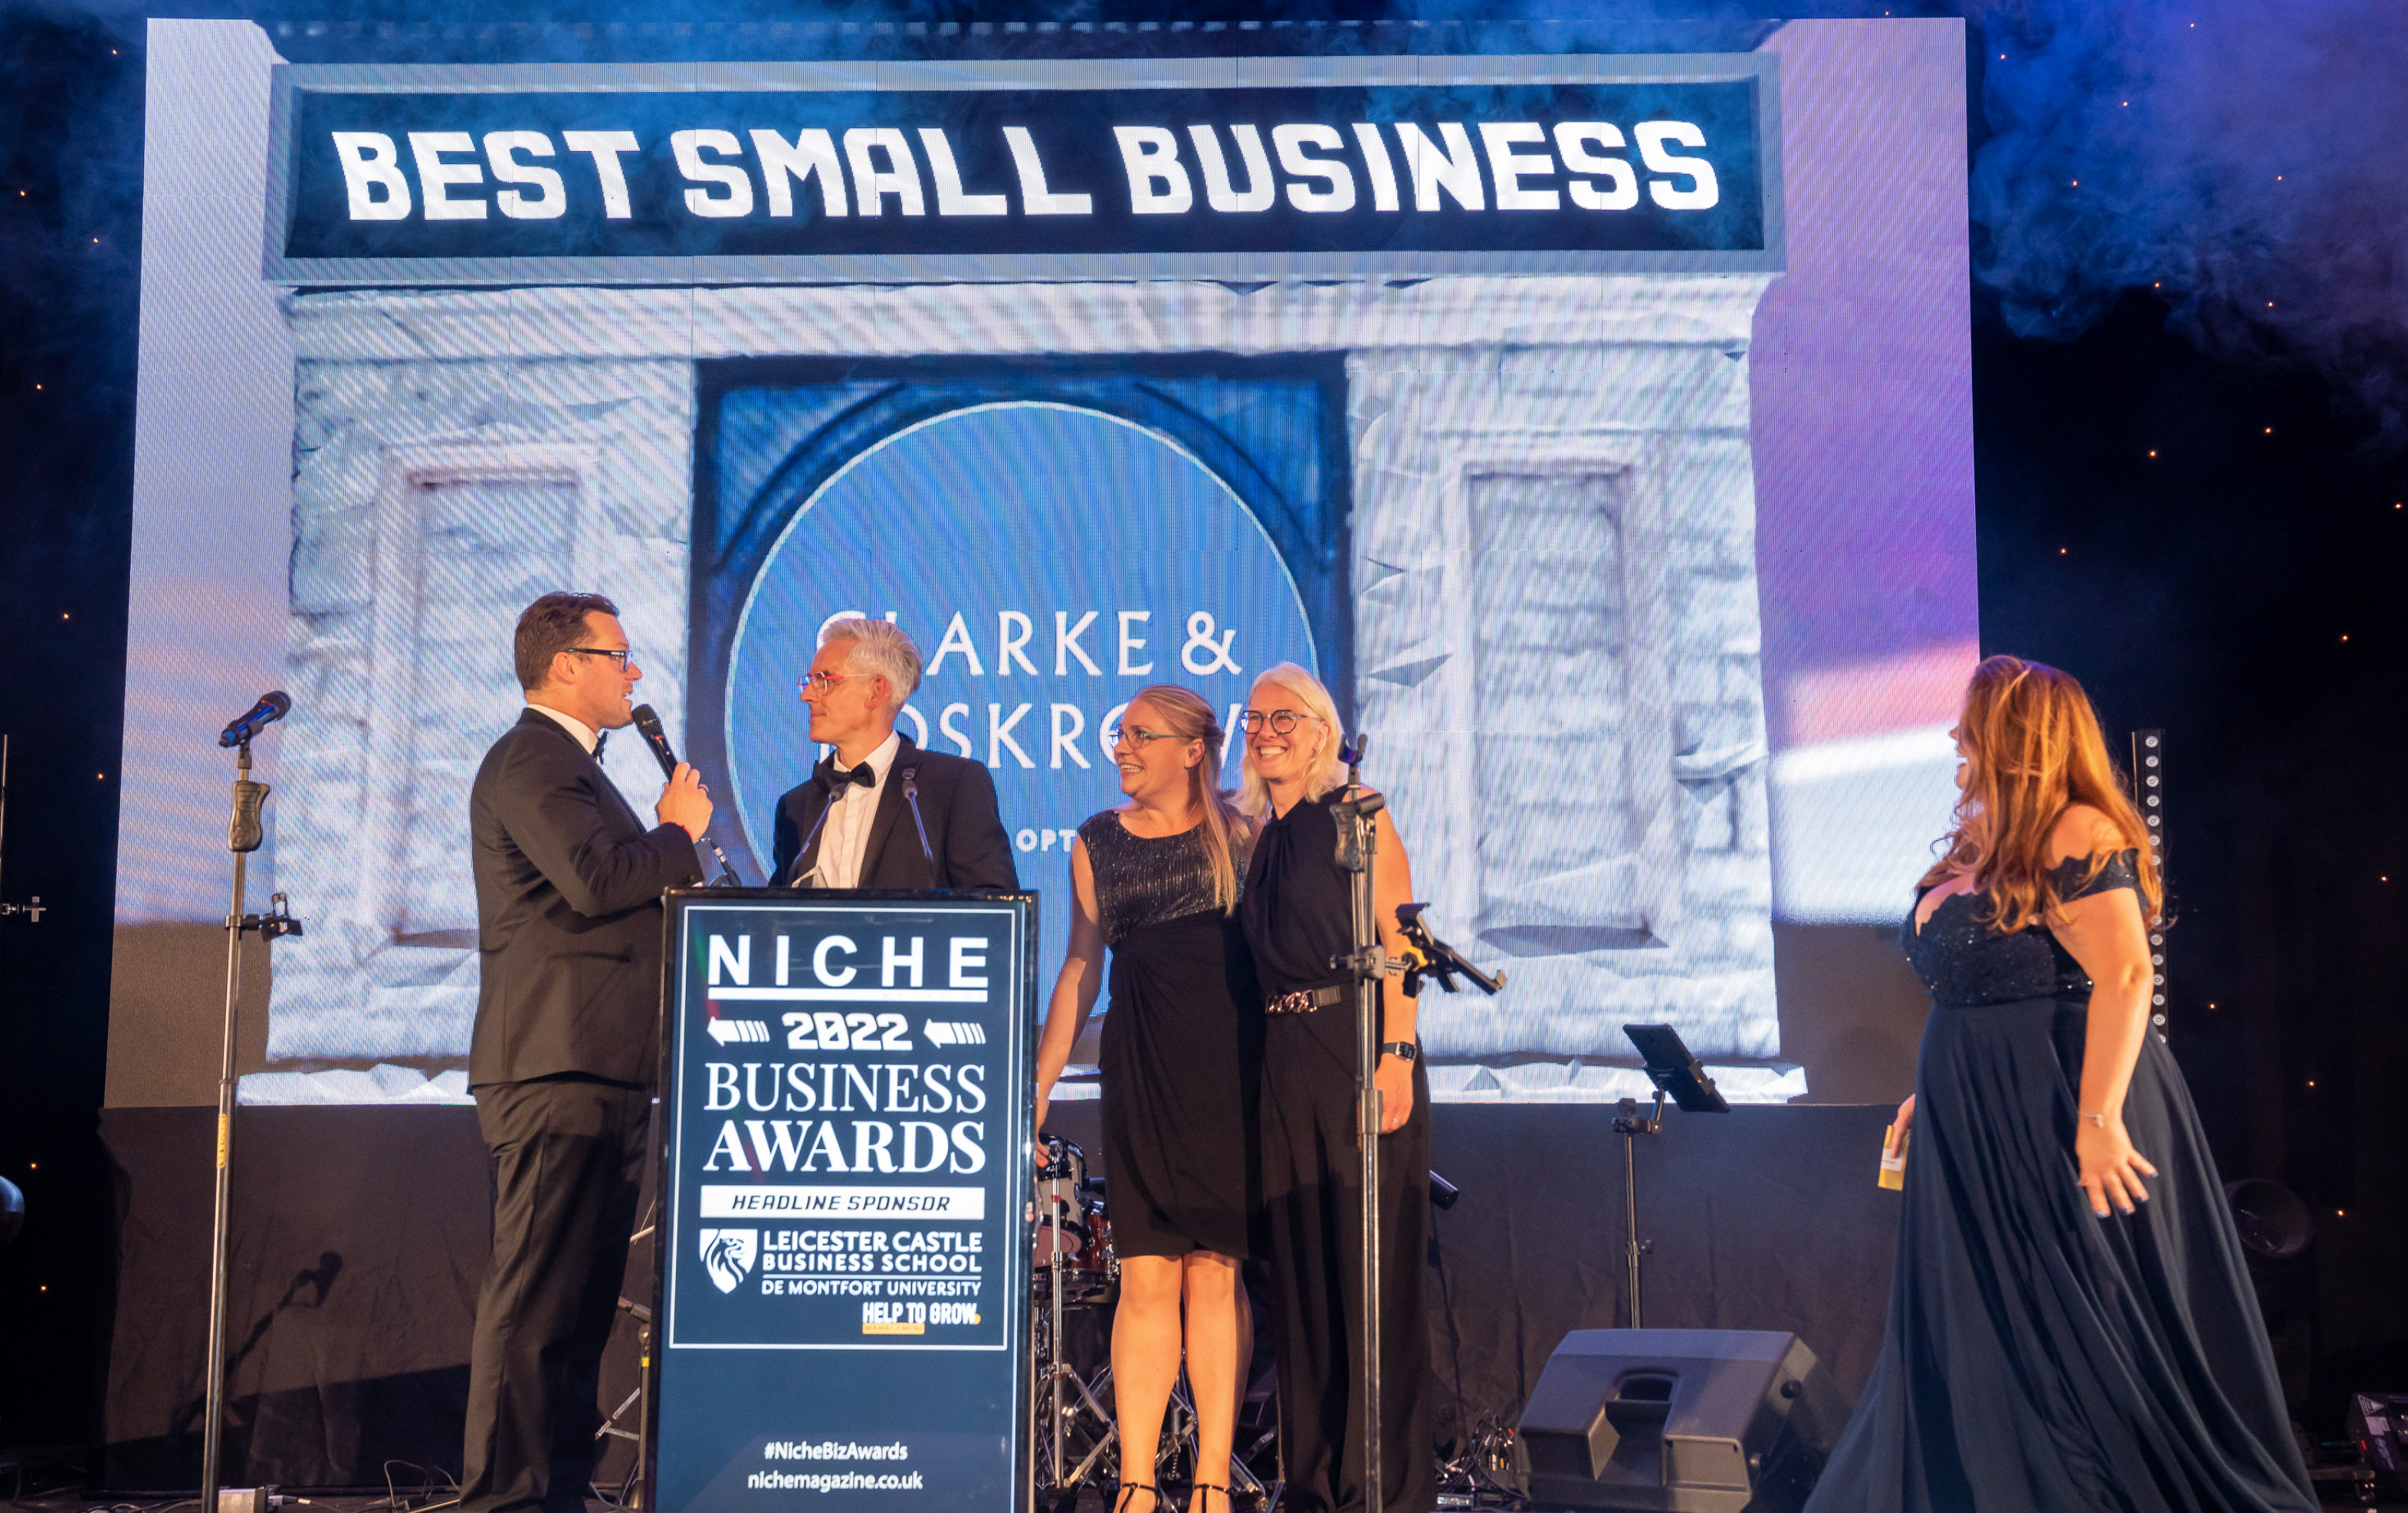 The value of award recognition is seen at the Niche Business Awards 2022